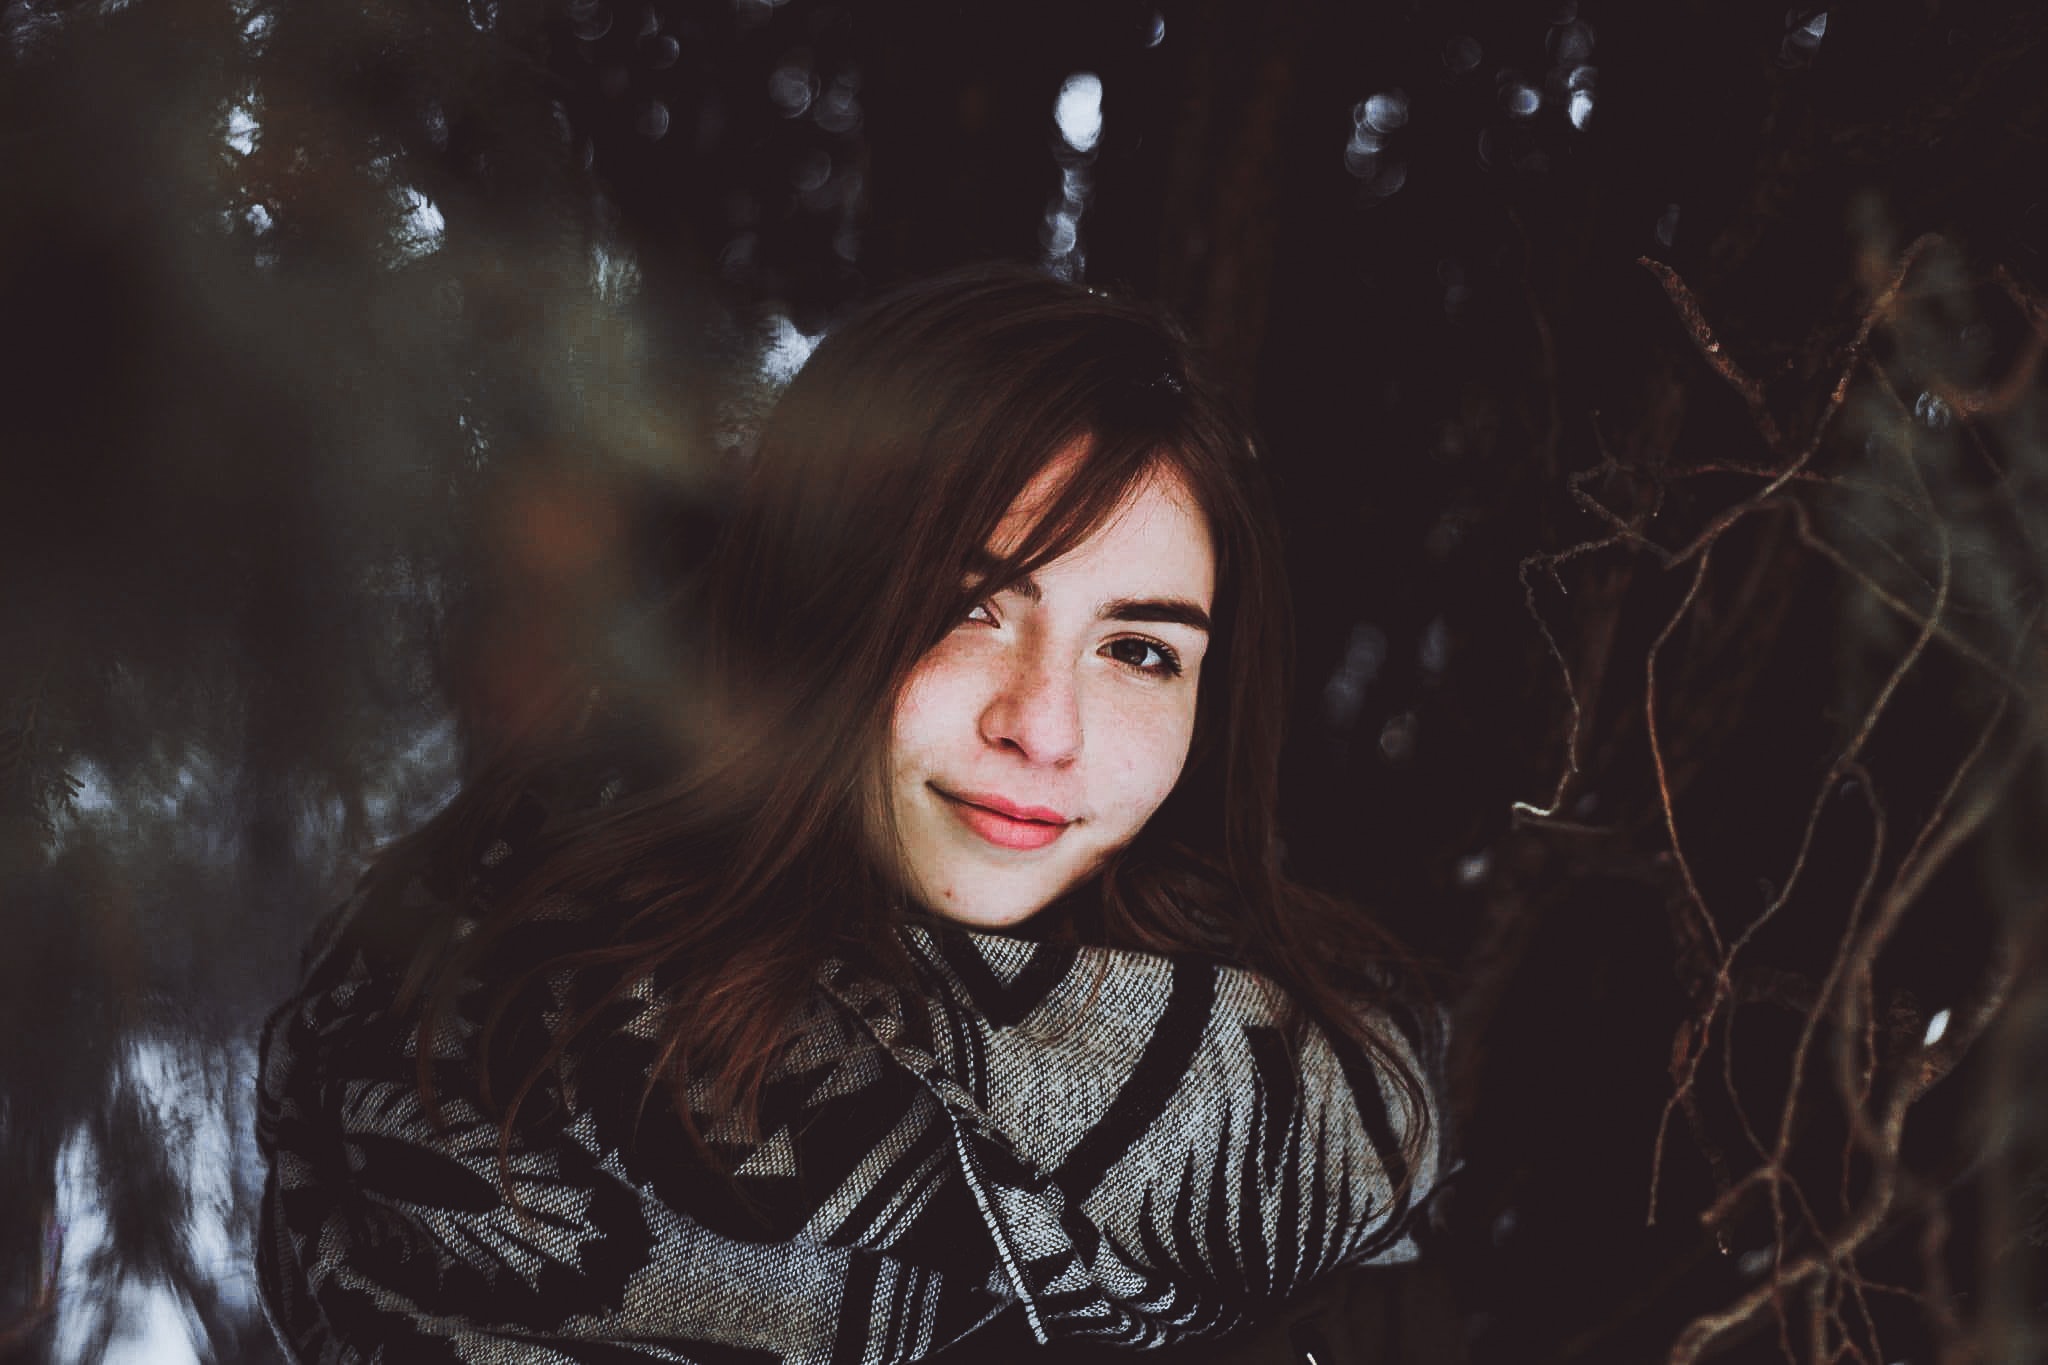 Woman in Black and Gray Sweater Posing Smile for Photo, Art, Lady, Woman, Winter, HQ Photo